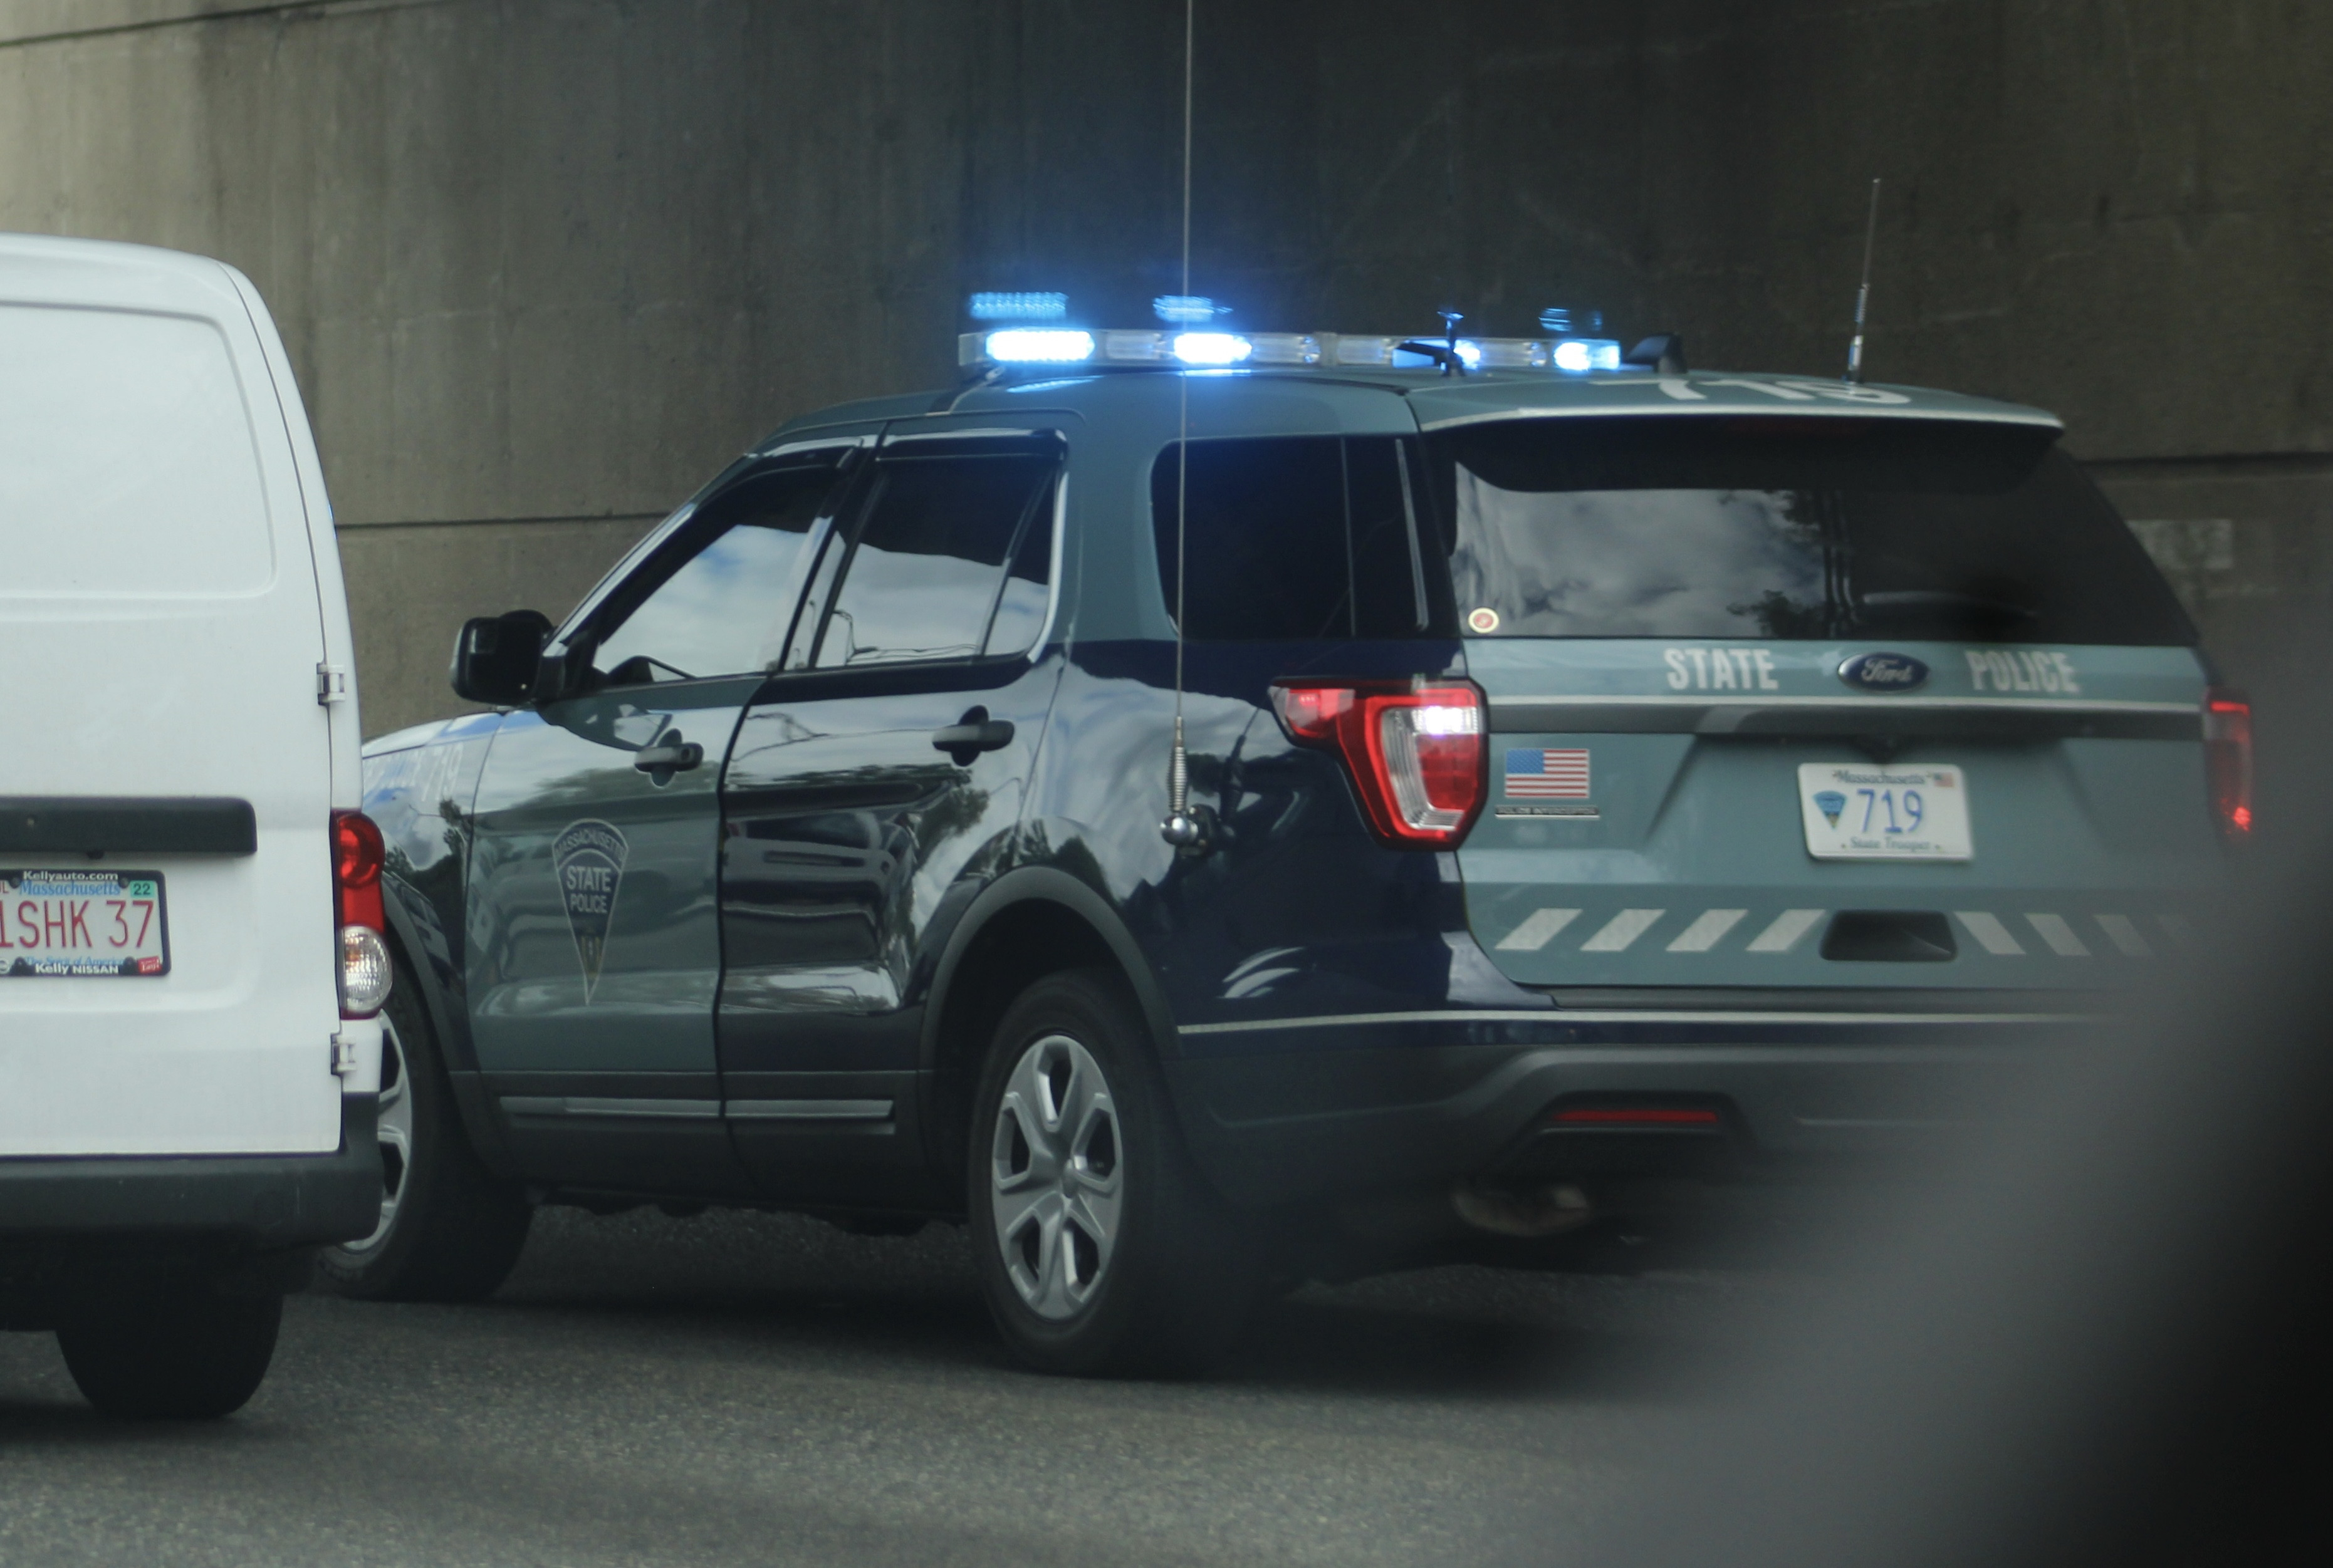 A photo  of Massachusetts State Police
            Cruiser 719, a 2019 Ford Police Interceptor Utility             taken by @riemergencyvehicles